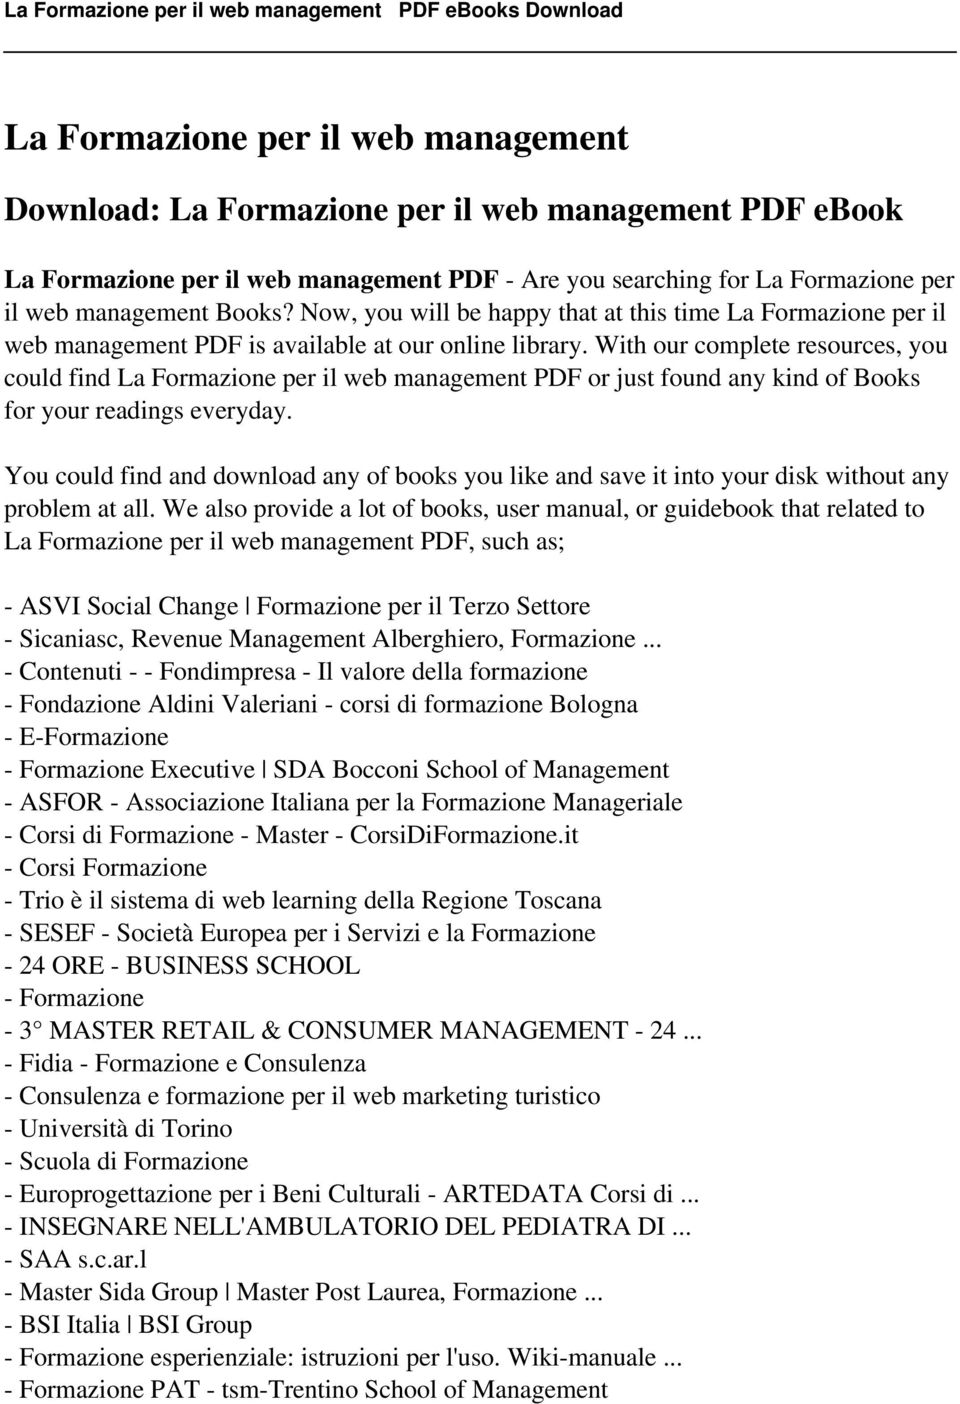 With our complete resources, you could find La Formazione per il web management PDF or just found any kind of Books for your readings everyday.